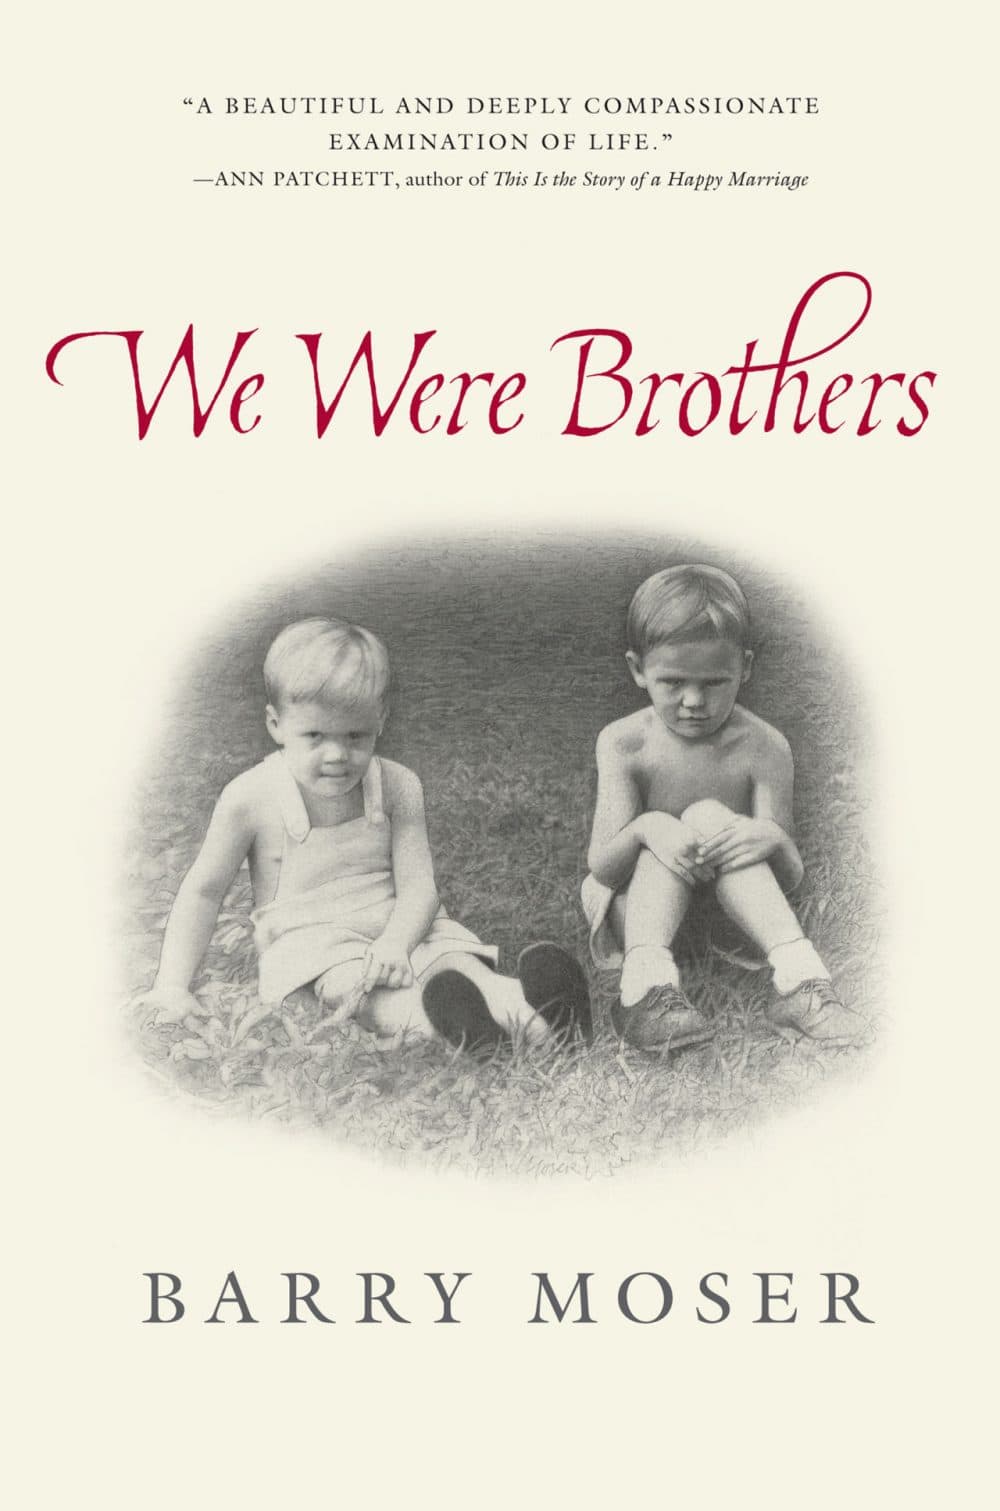 Barry Moser's new memoir is about his relationship with his brother and his relationship with his Southern childhood. (Courtesy Algonquin Books)